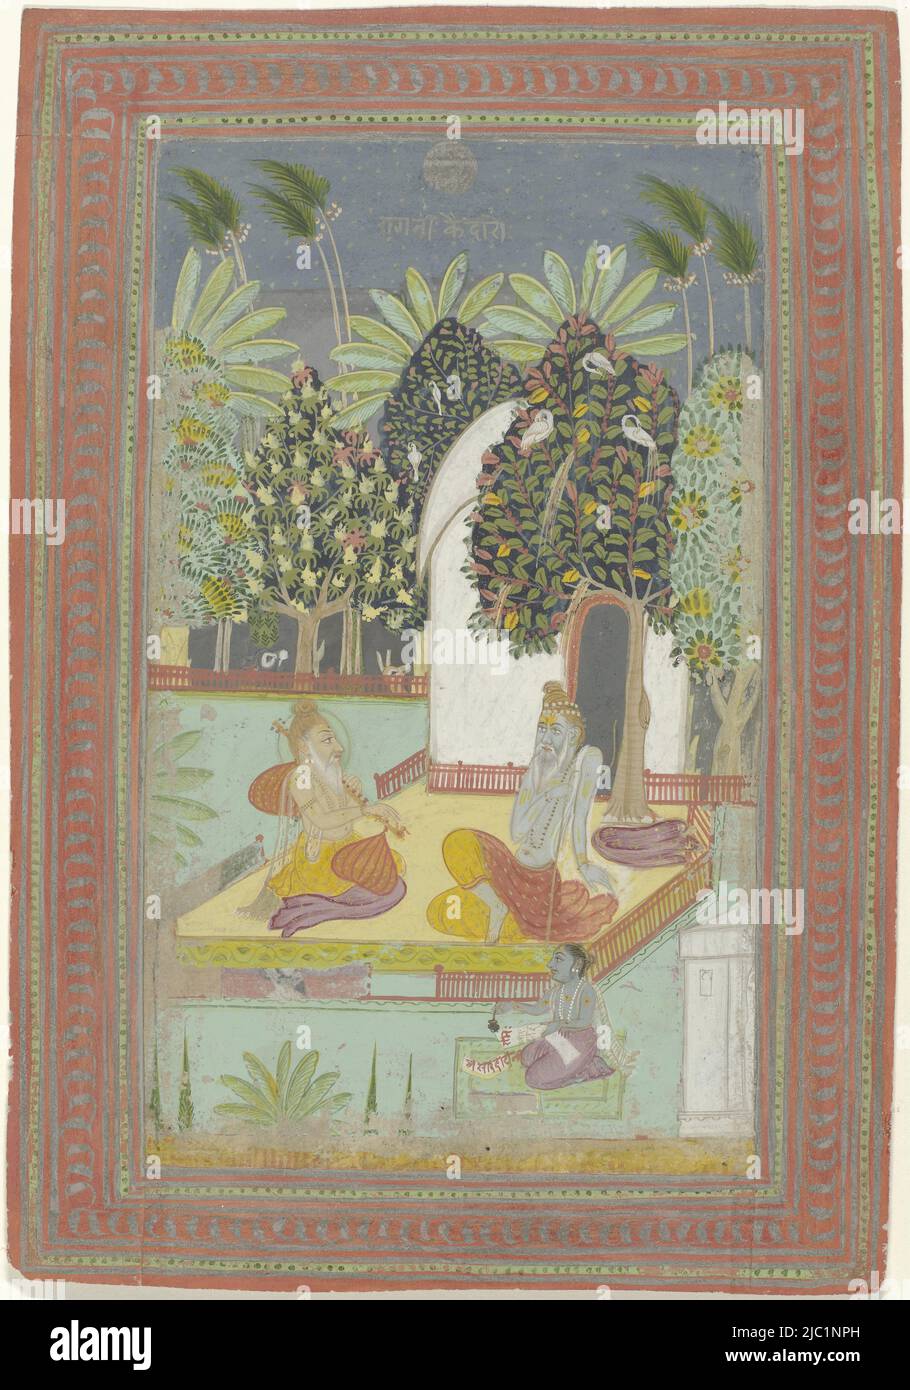 On a yellow terrace are two men, the right one is a yogi and is colored blue, the left one is a frost, with halo, in front of the terrace is a writer holding paper and stamp, in the background flowering trees against a night sky dotted with stars and a full moon, white birds in the trees. The scene is framed by ornamental borders in green and red with silver motifs. In the night sky under the moon an inscription in silver, Kedar ragini., draughtsman: anonymous, Centraal-India, 1820, paper, brush, brush, h 314 mm × w 216 mm, h 253 mm × w 149 mm Stock Photo